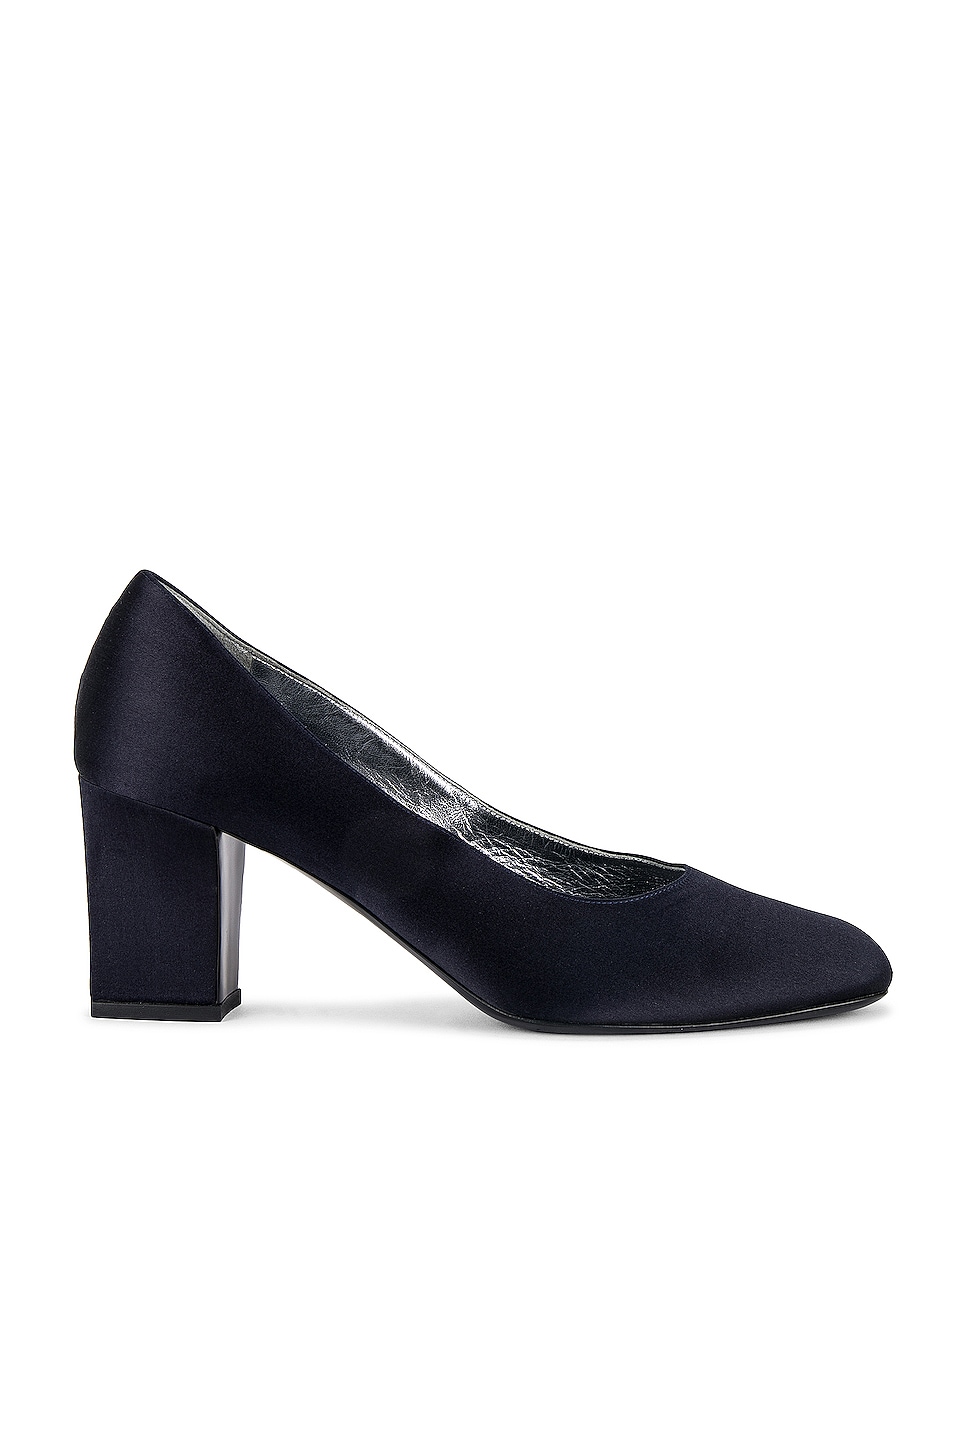 Image 1 of The Row Fiore Pump in NAVY